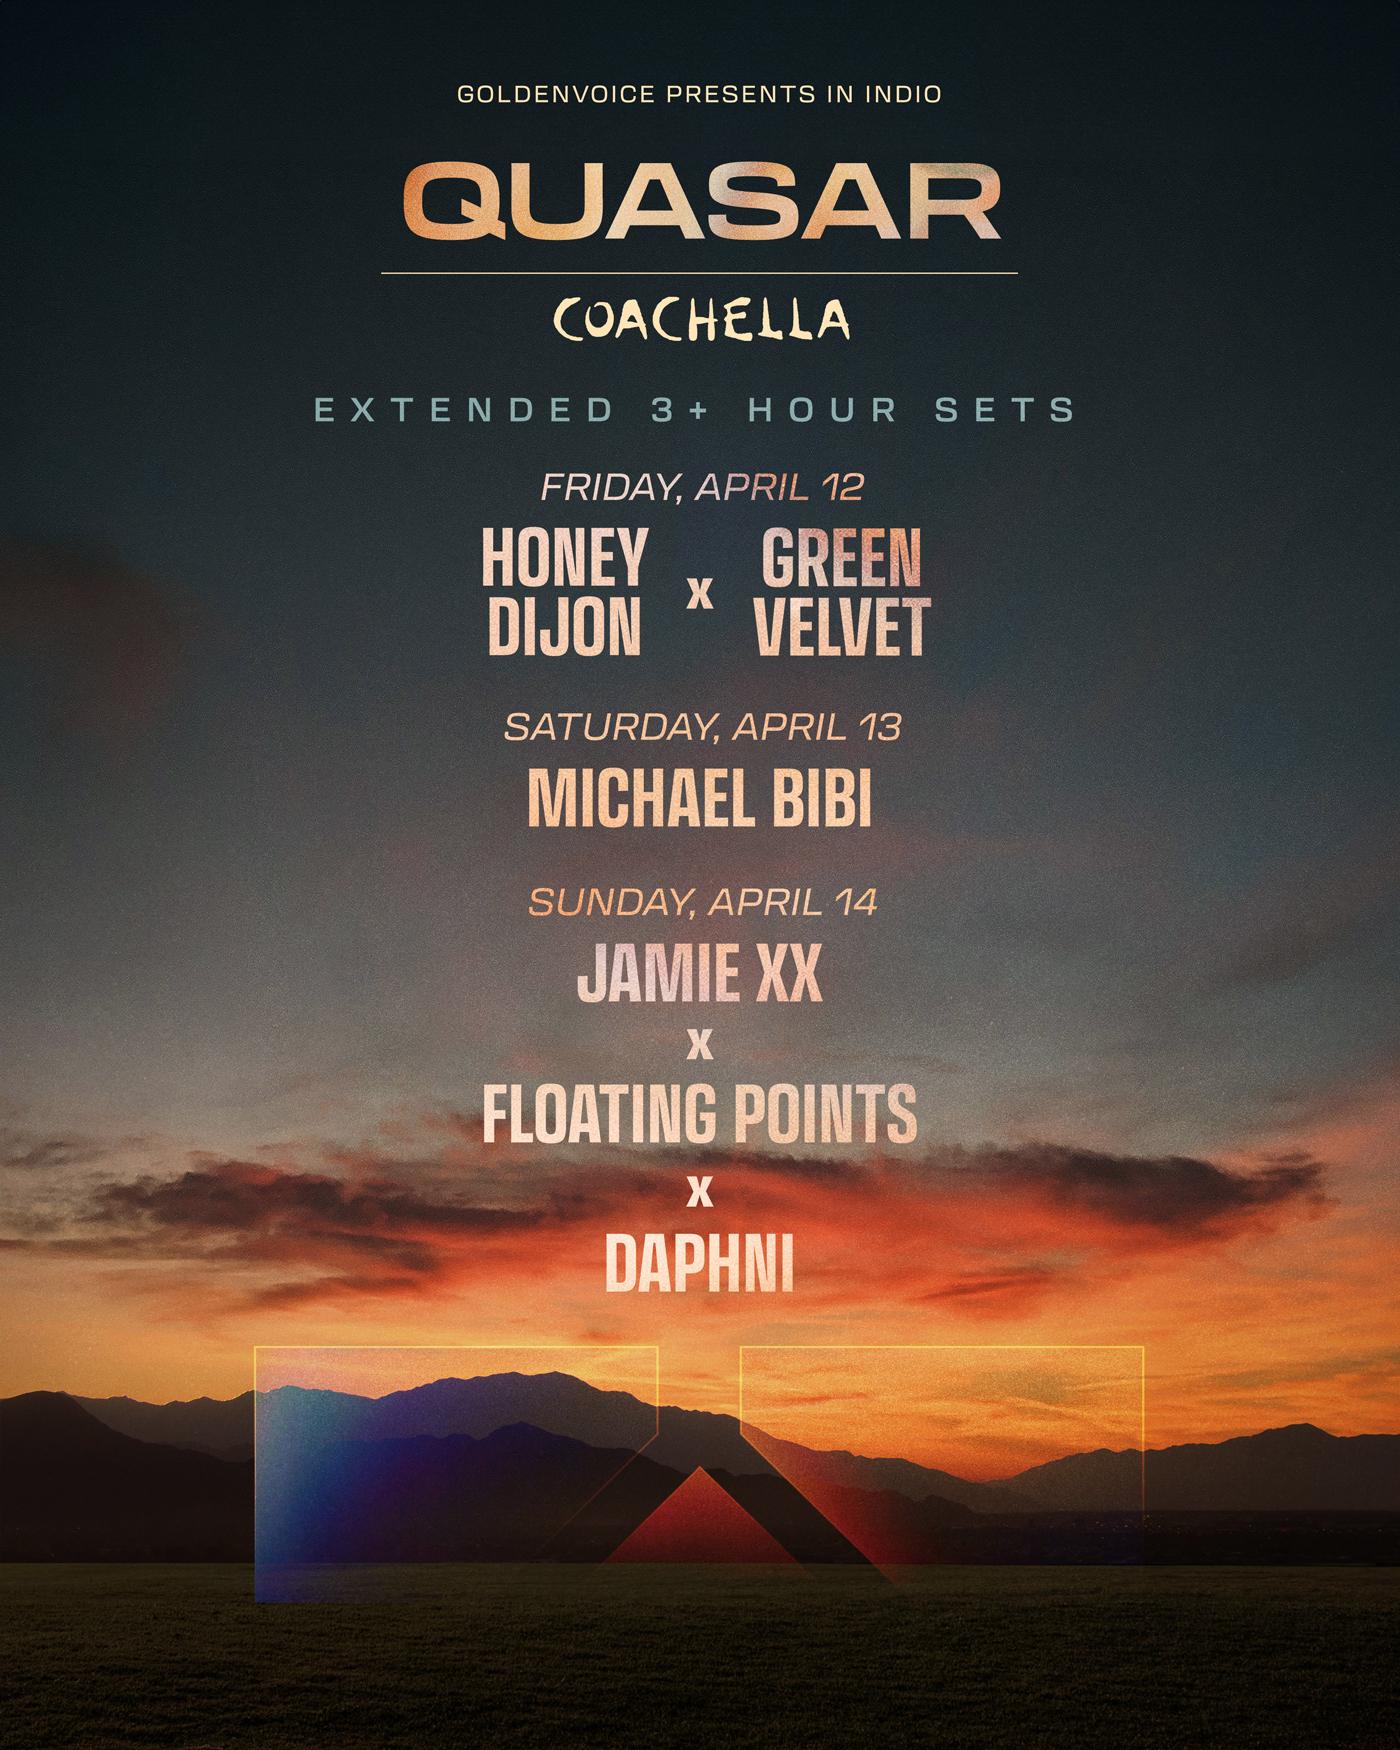 Quasar stage weekend one lineup